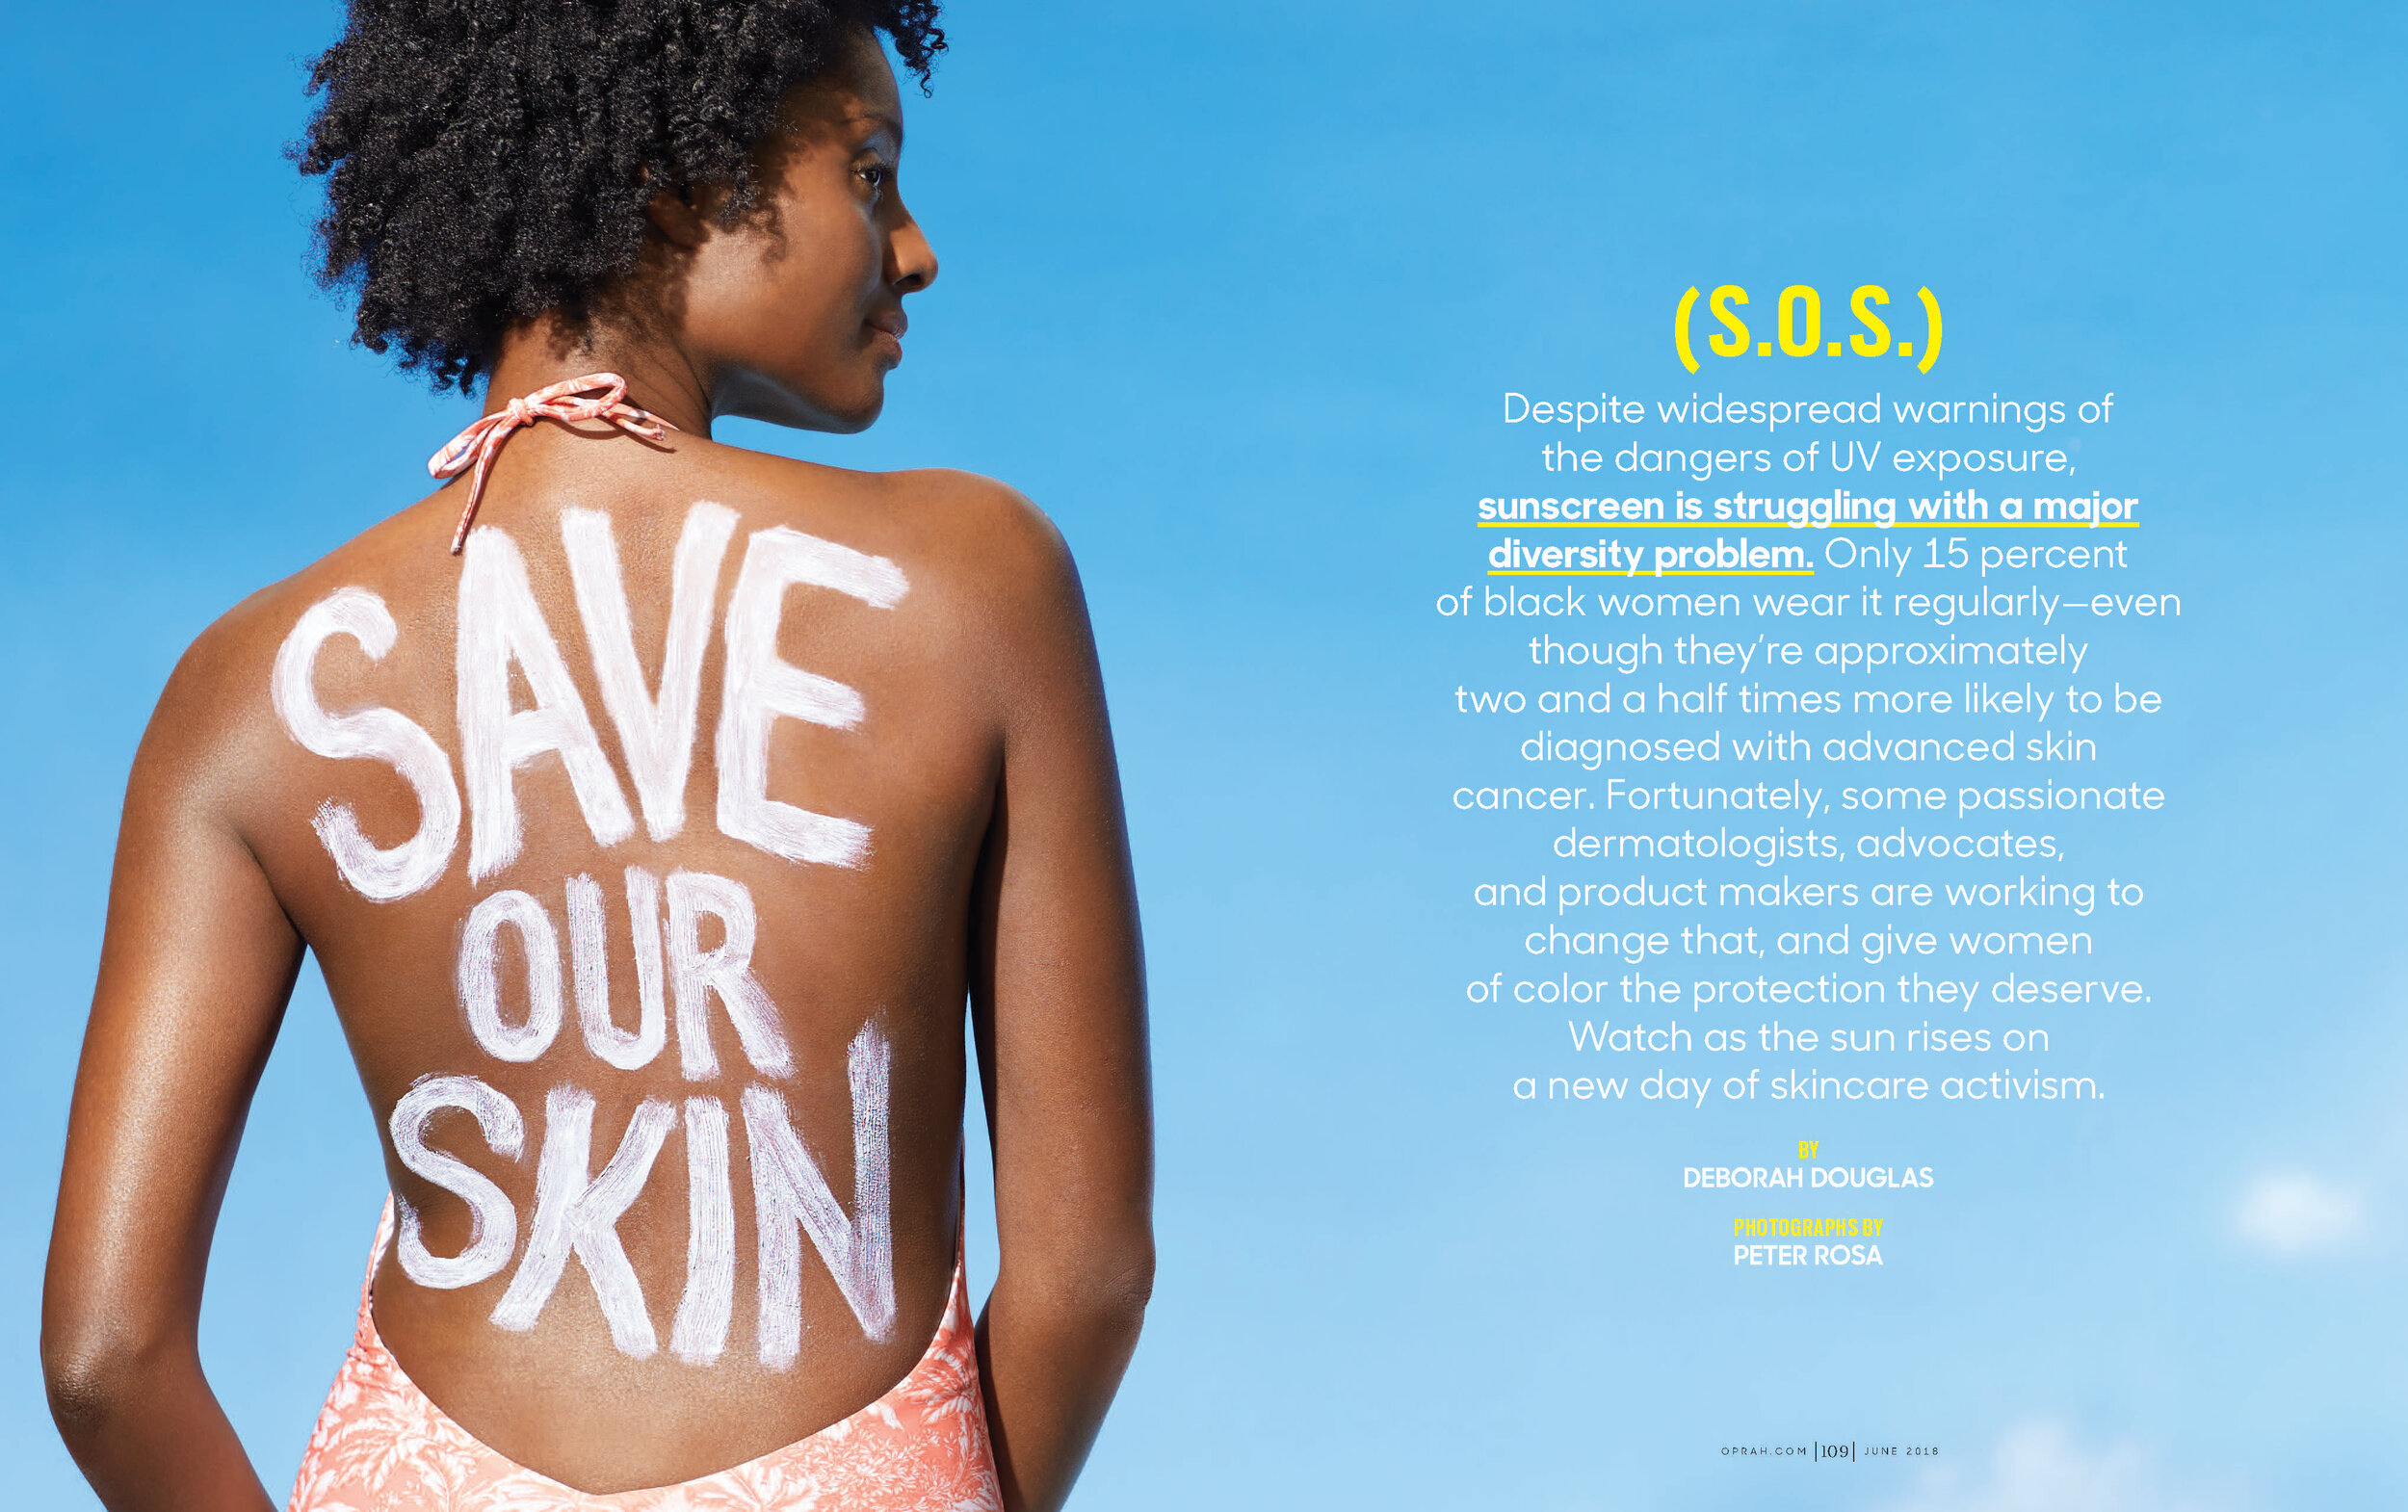 "Save our skin" 